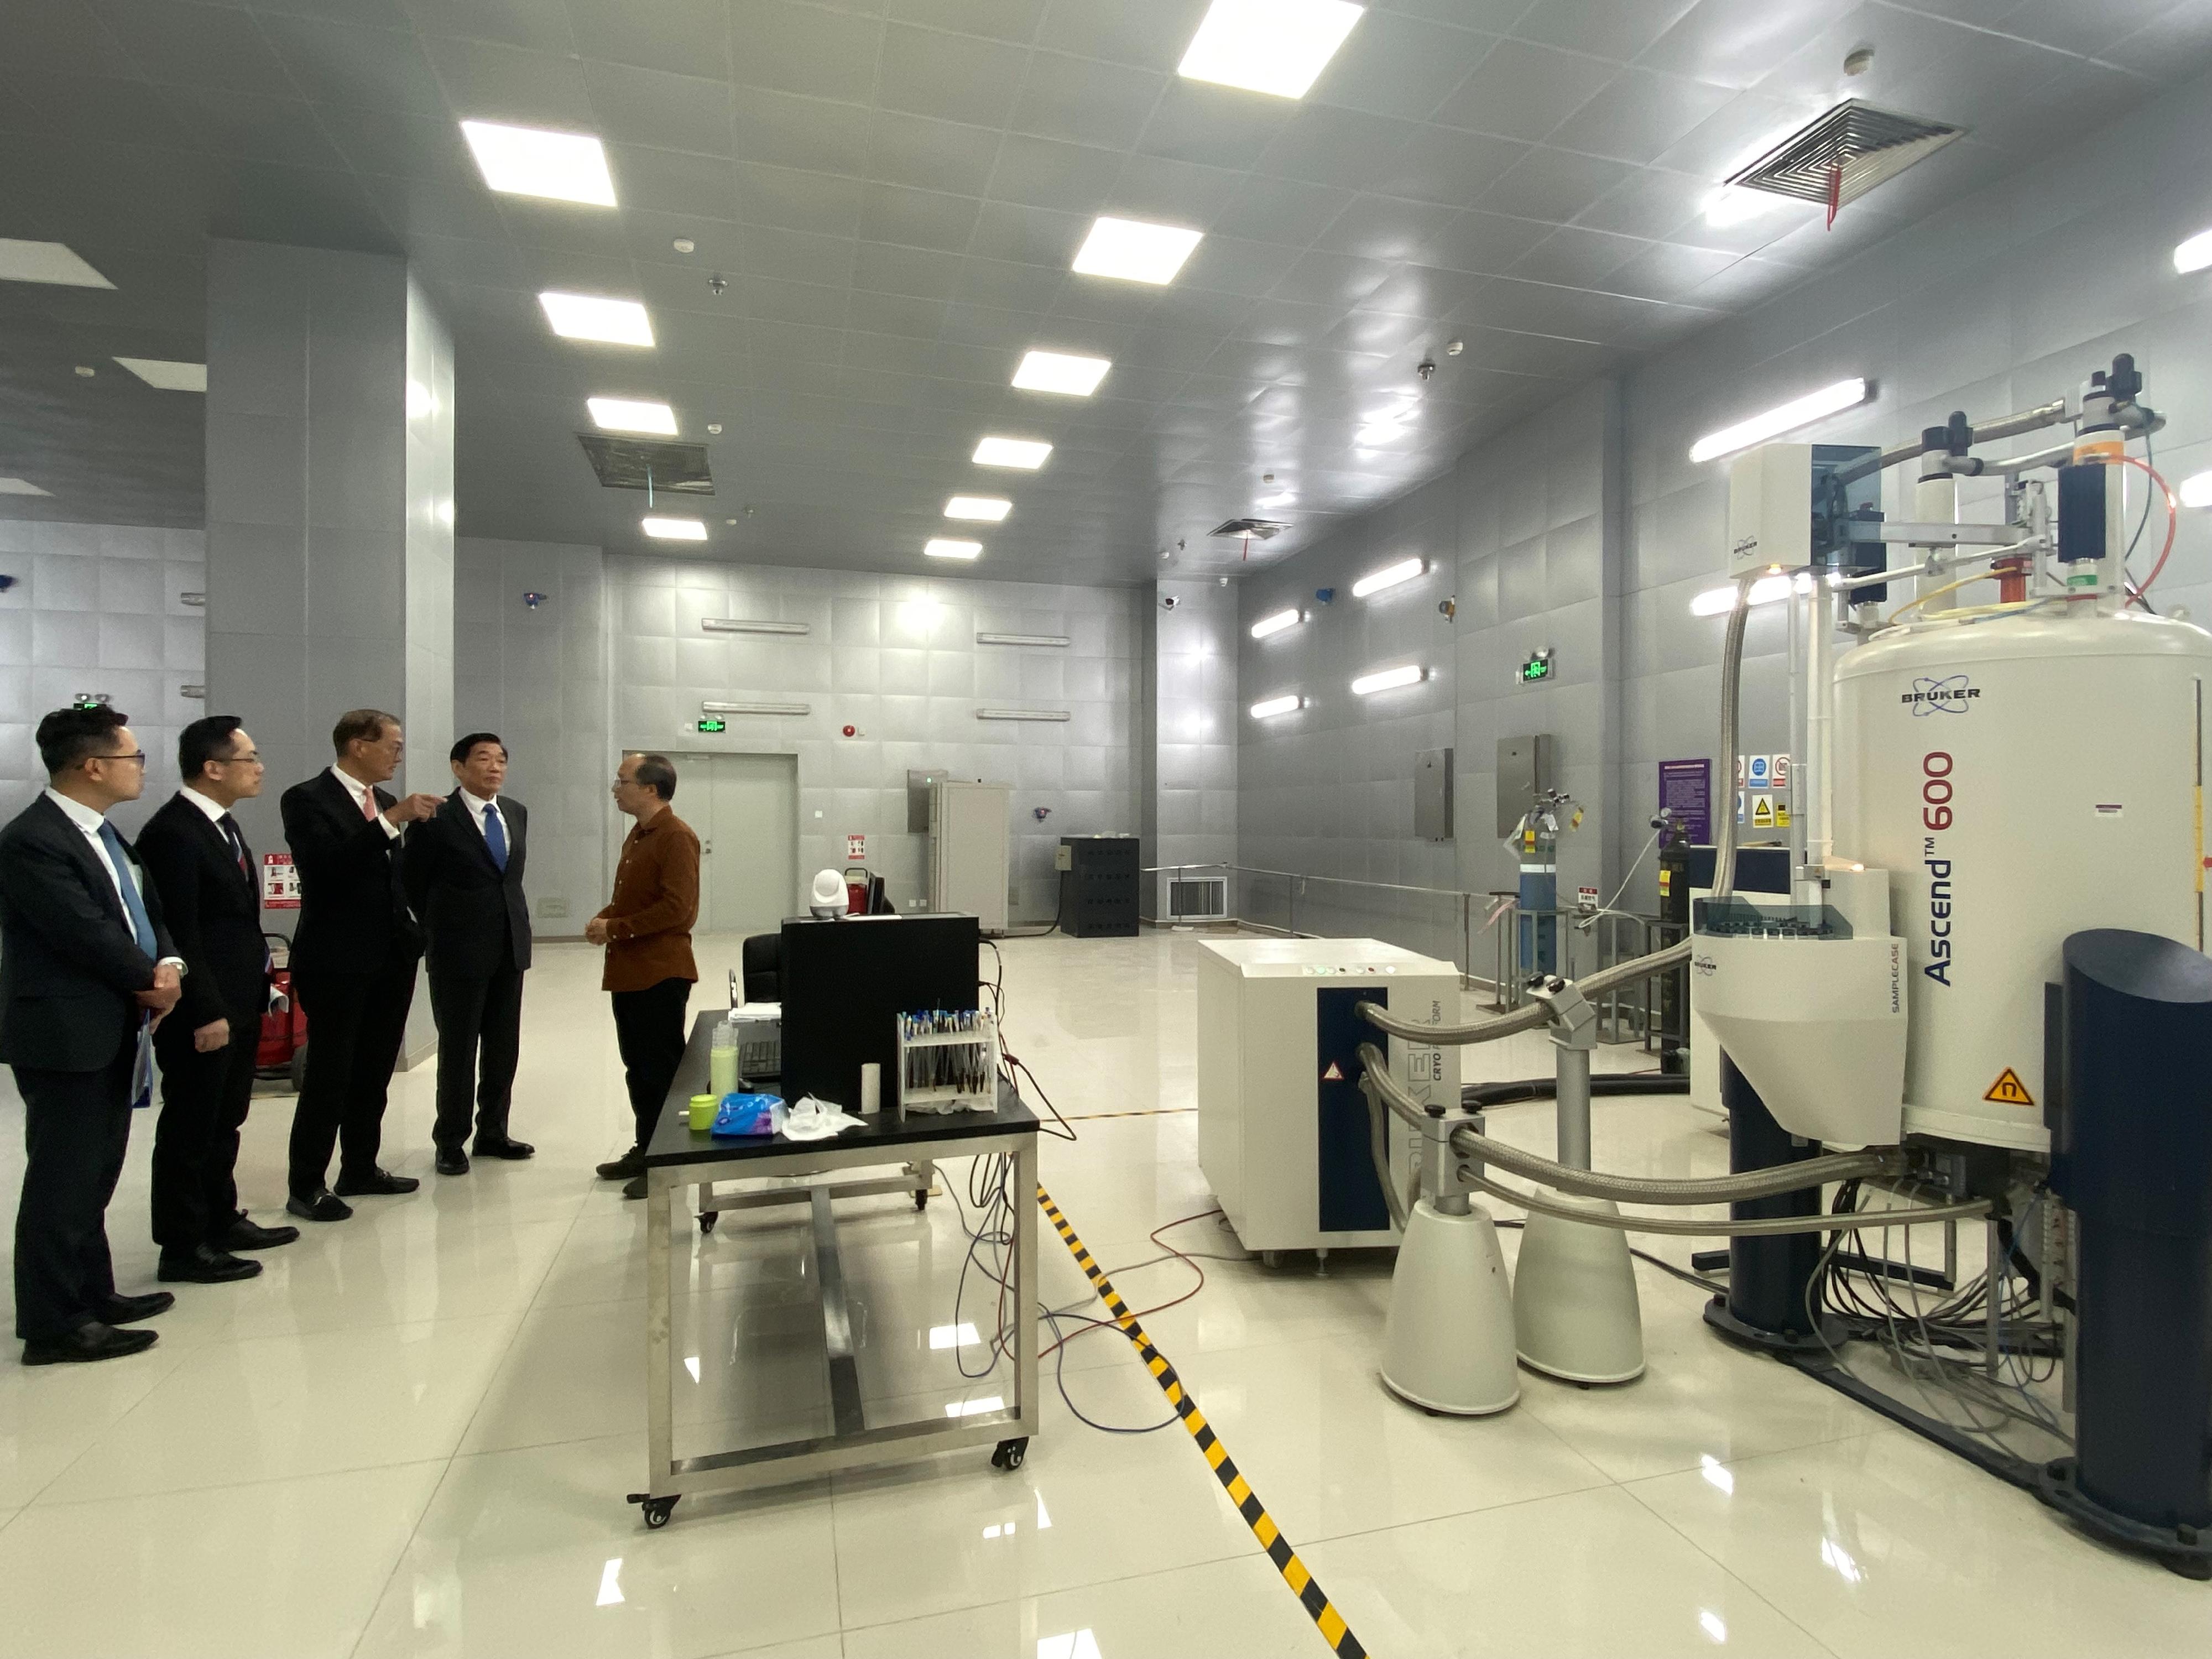 The Secretary for Health, Professor Lo Chung-mau, and his delegation visited the Technology Center for Protein Sciences at Tsinghua University today (March 17). Photo shows Professor Lo (third left); the Director of Health, Dr Ronald Lam (second left); Deputy Secretary for Health Mr Eddie Lee (first left); and the Chairman of the Hospital Authority, Mr Henry Fan (fourth left), learning from the staff about the operation of the laboratory in the Technology Center.